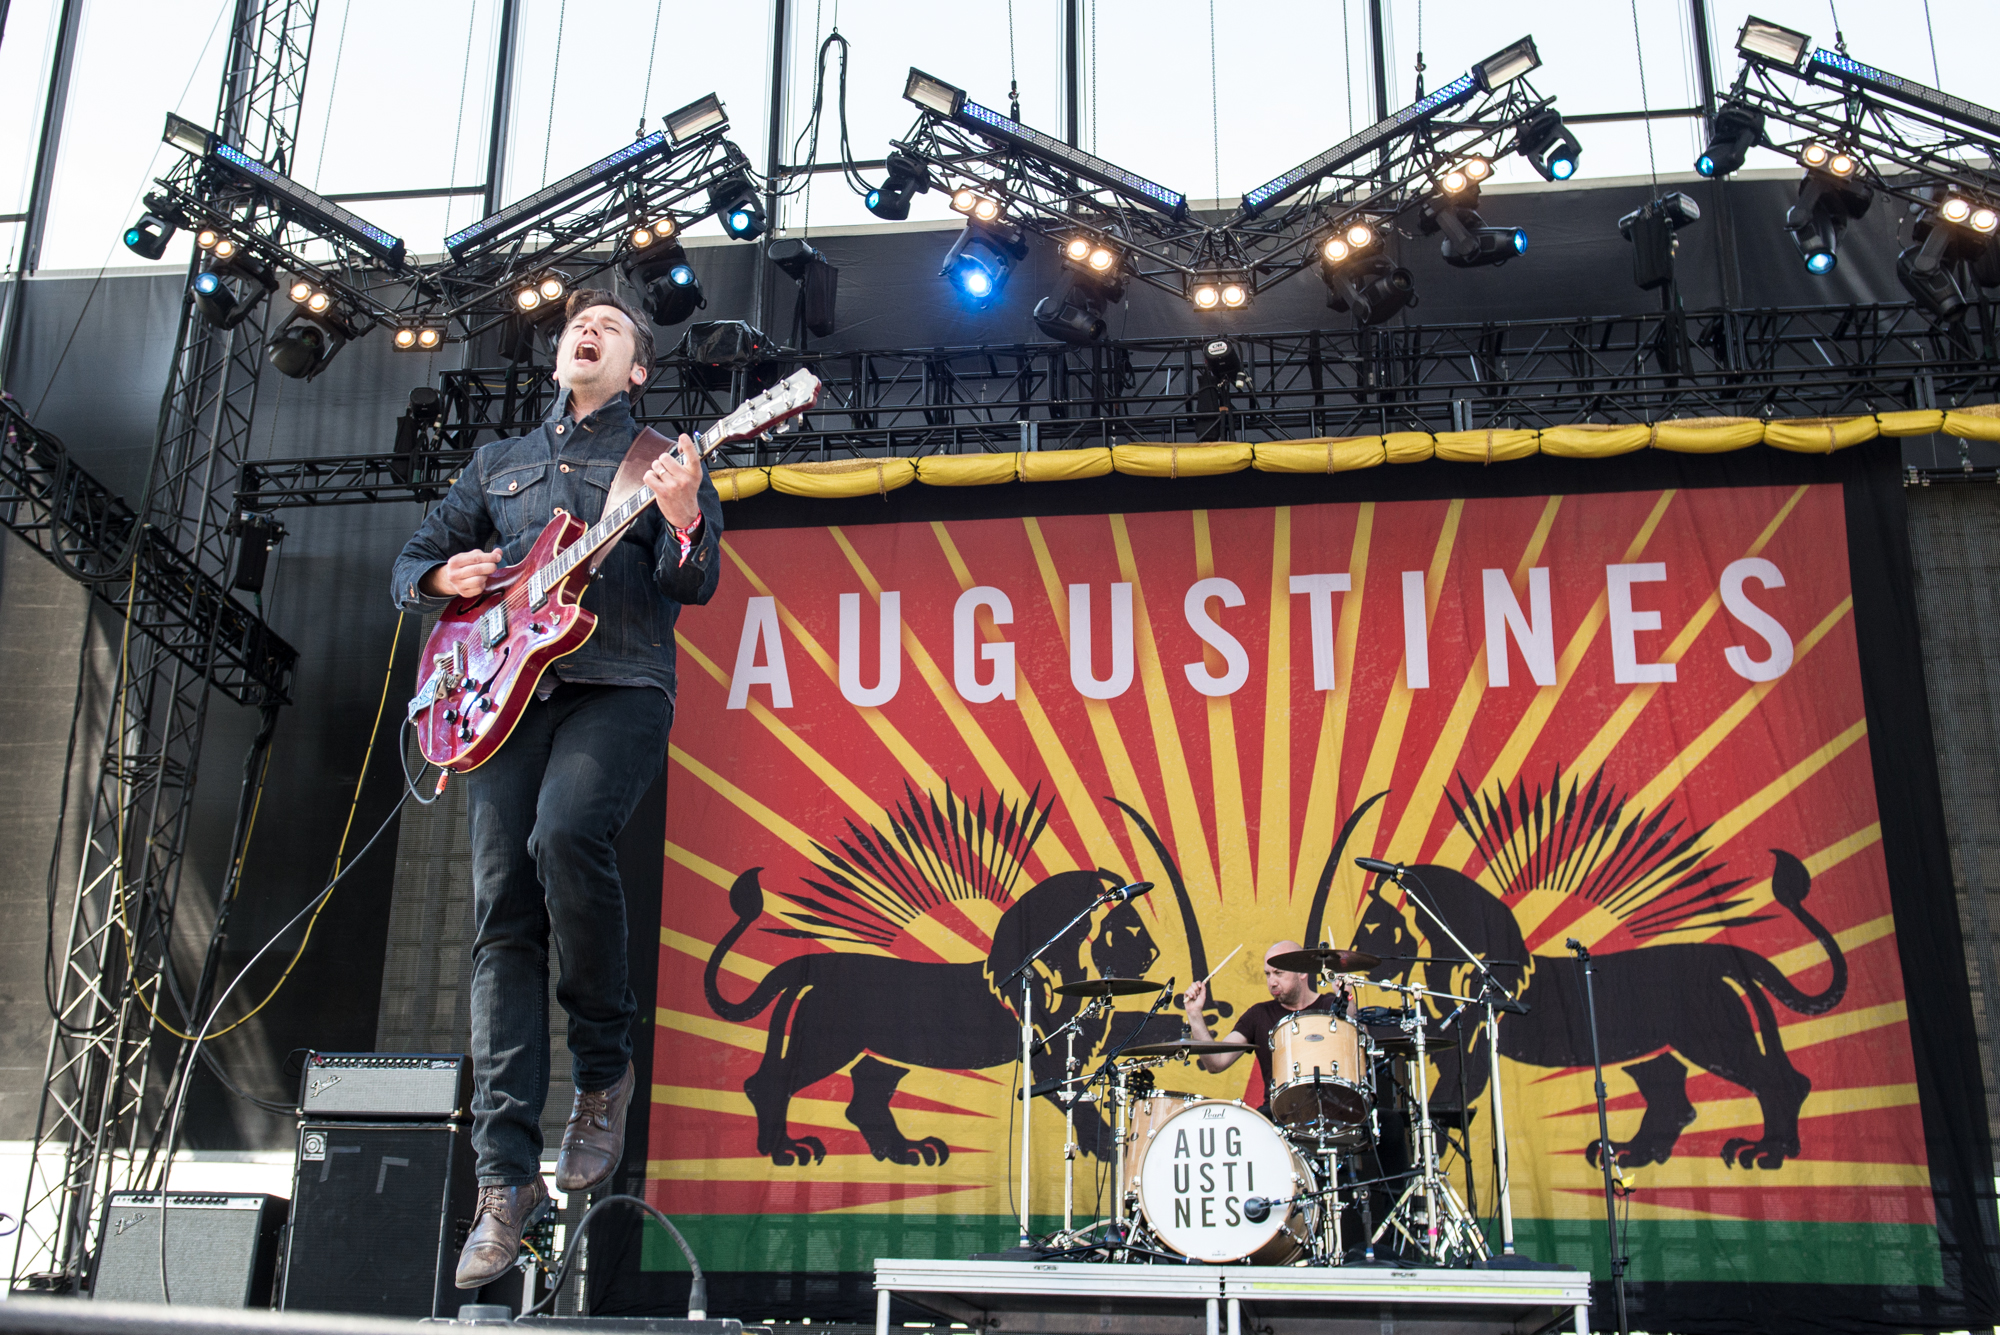 Augustines rocked our socks off despite an earlier day set